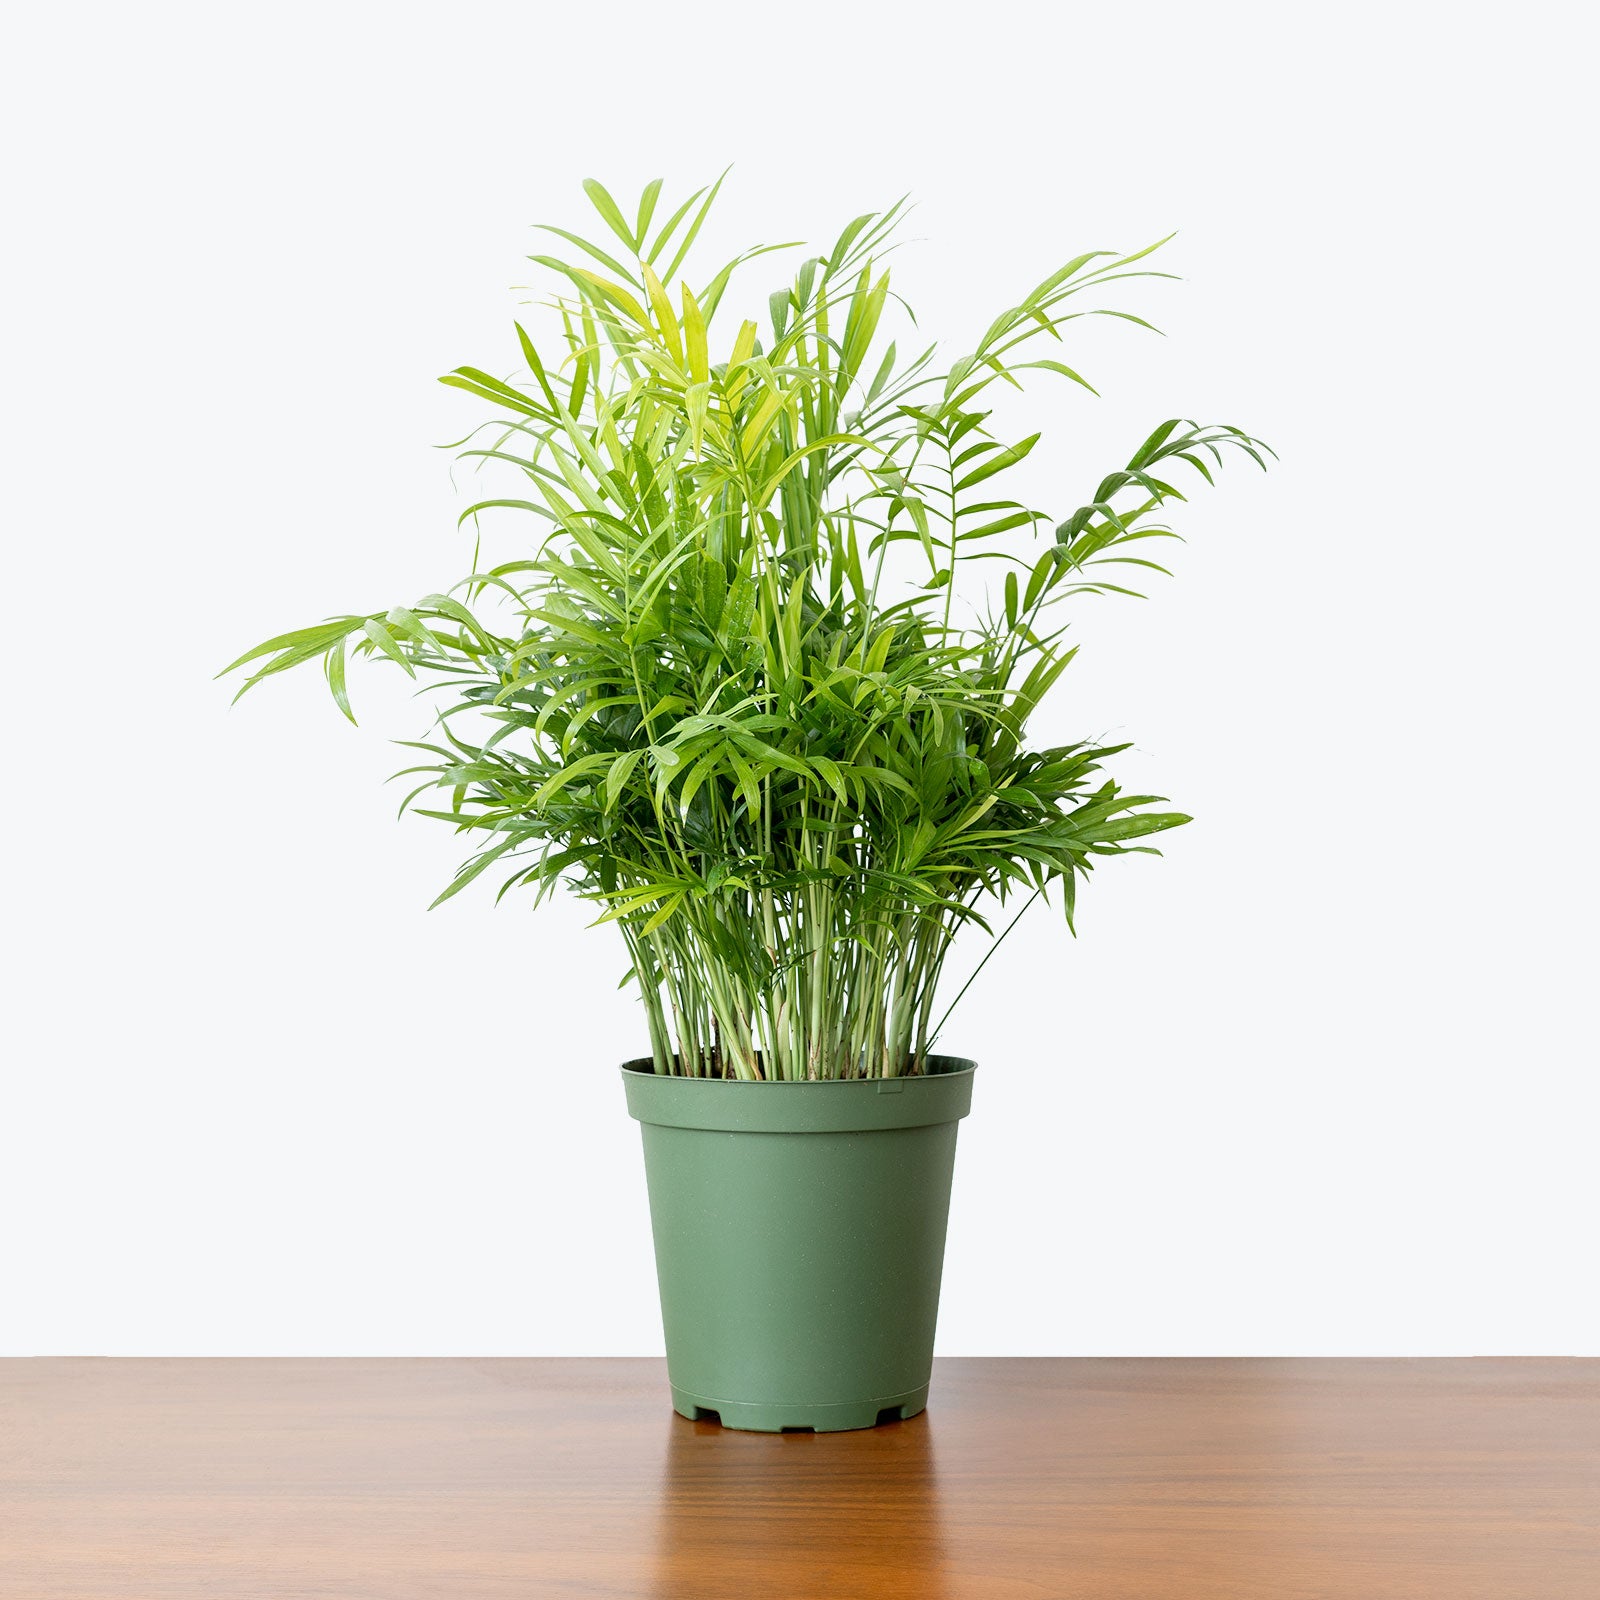 Pet Friendly Duo Parlor Palm in 3D Printed Eco Friendly Planter - House Plants Delivery Toronto - JOMO Studio